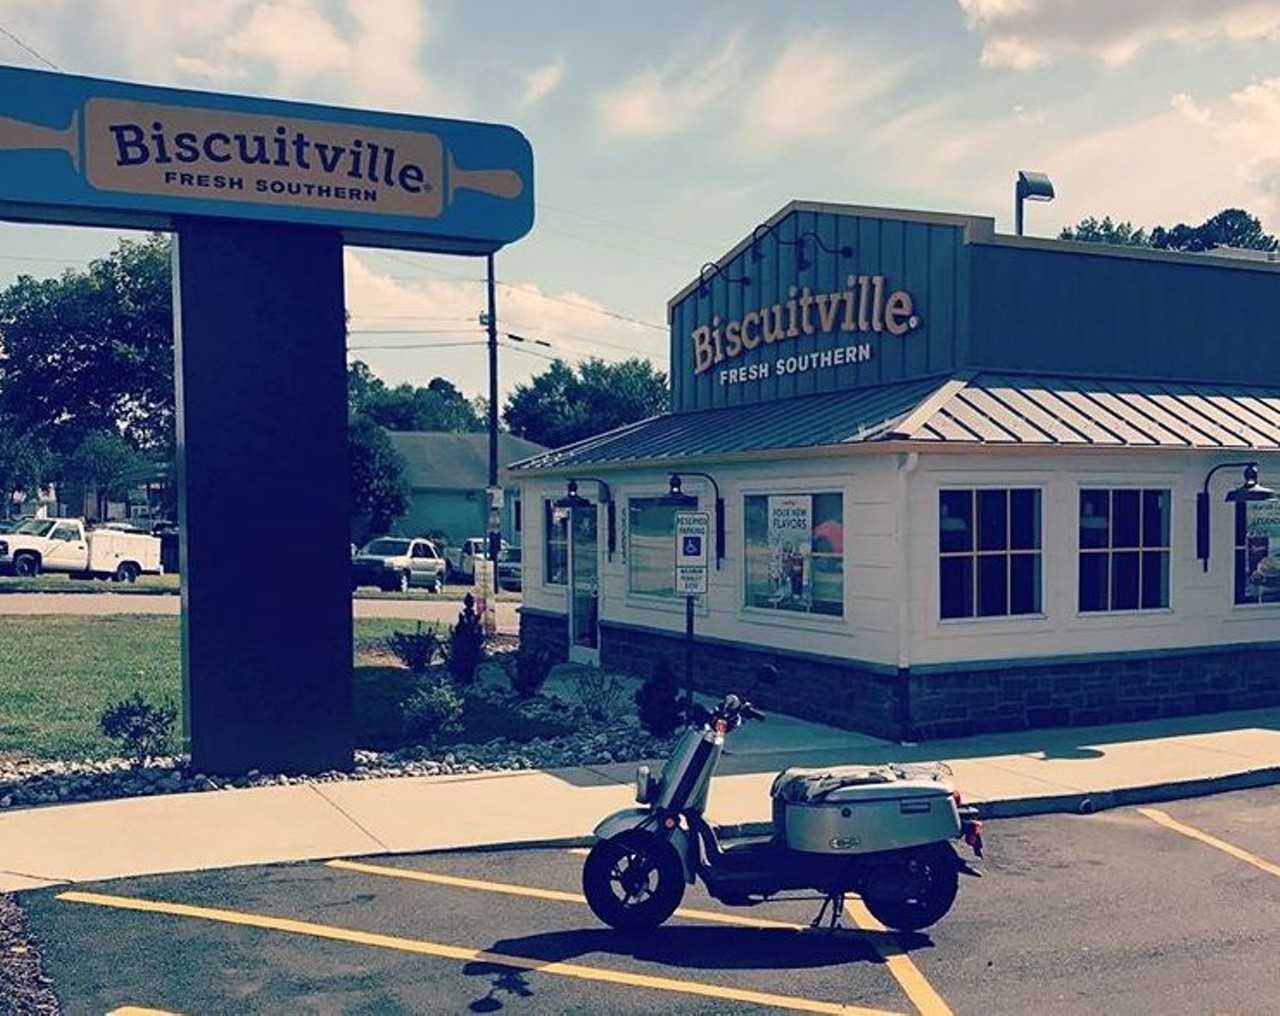 Biscuitville
Looking for a quick bite of soul food &#151; Biscuitville's got it. The only problem? You'll have to travel all the way to North Carolina or Virginia to get it. It's possible their fried chicken, flaky biscuits, and filling grits could be worth the trip.
Photo via Instragram user @agentpheeb